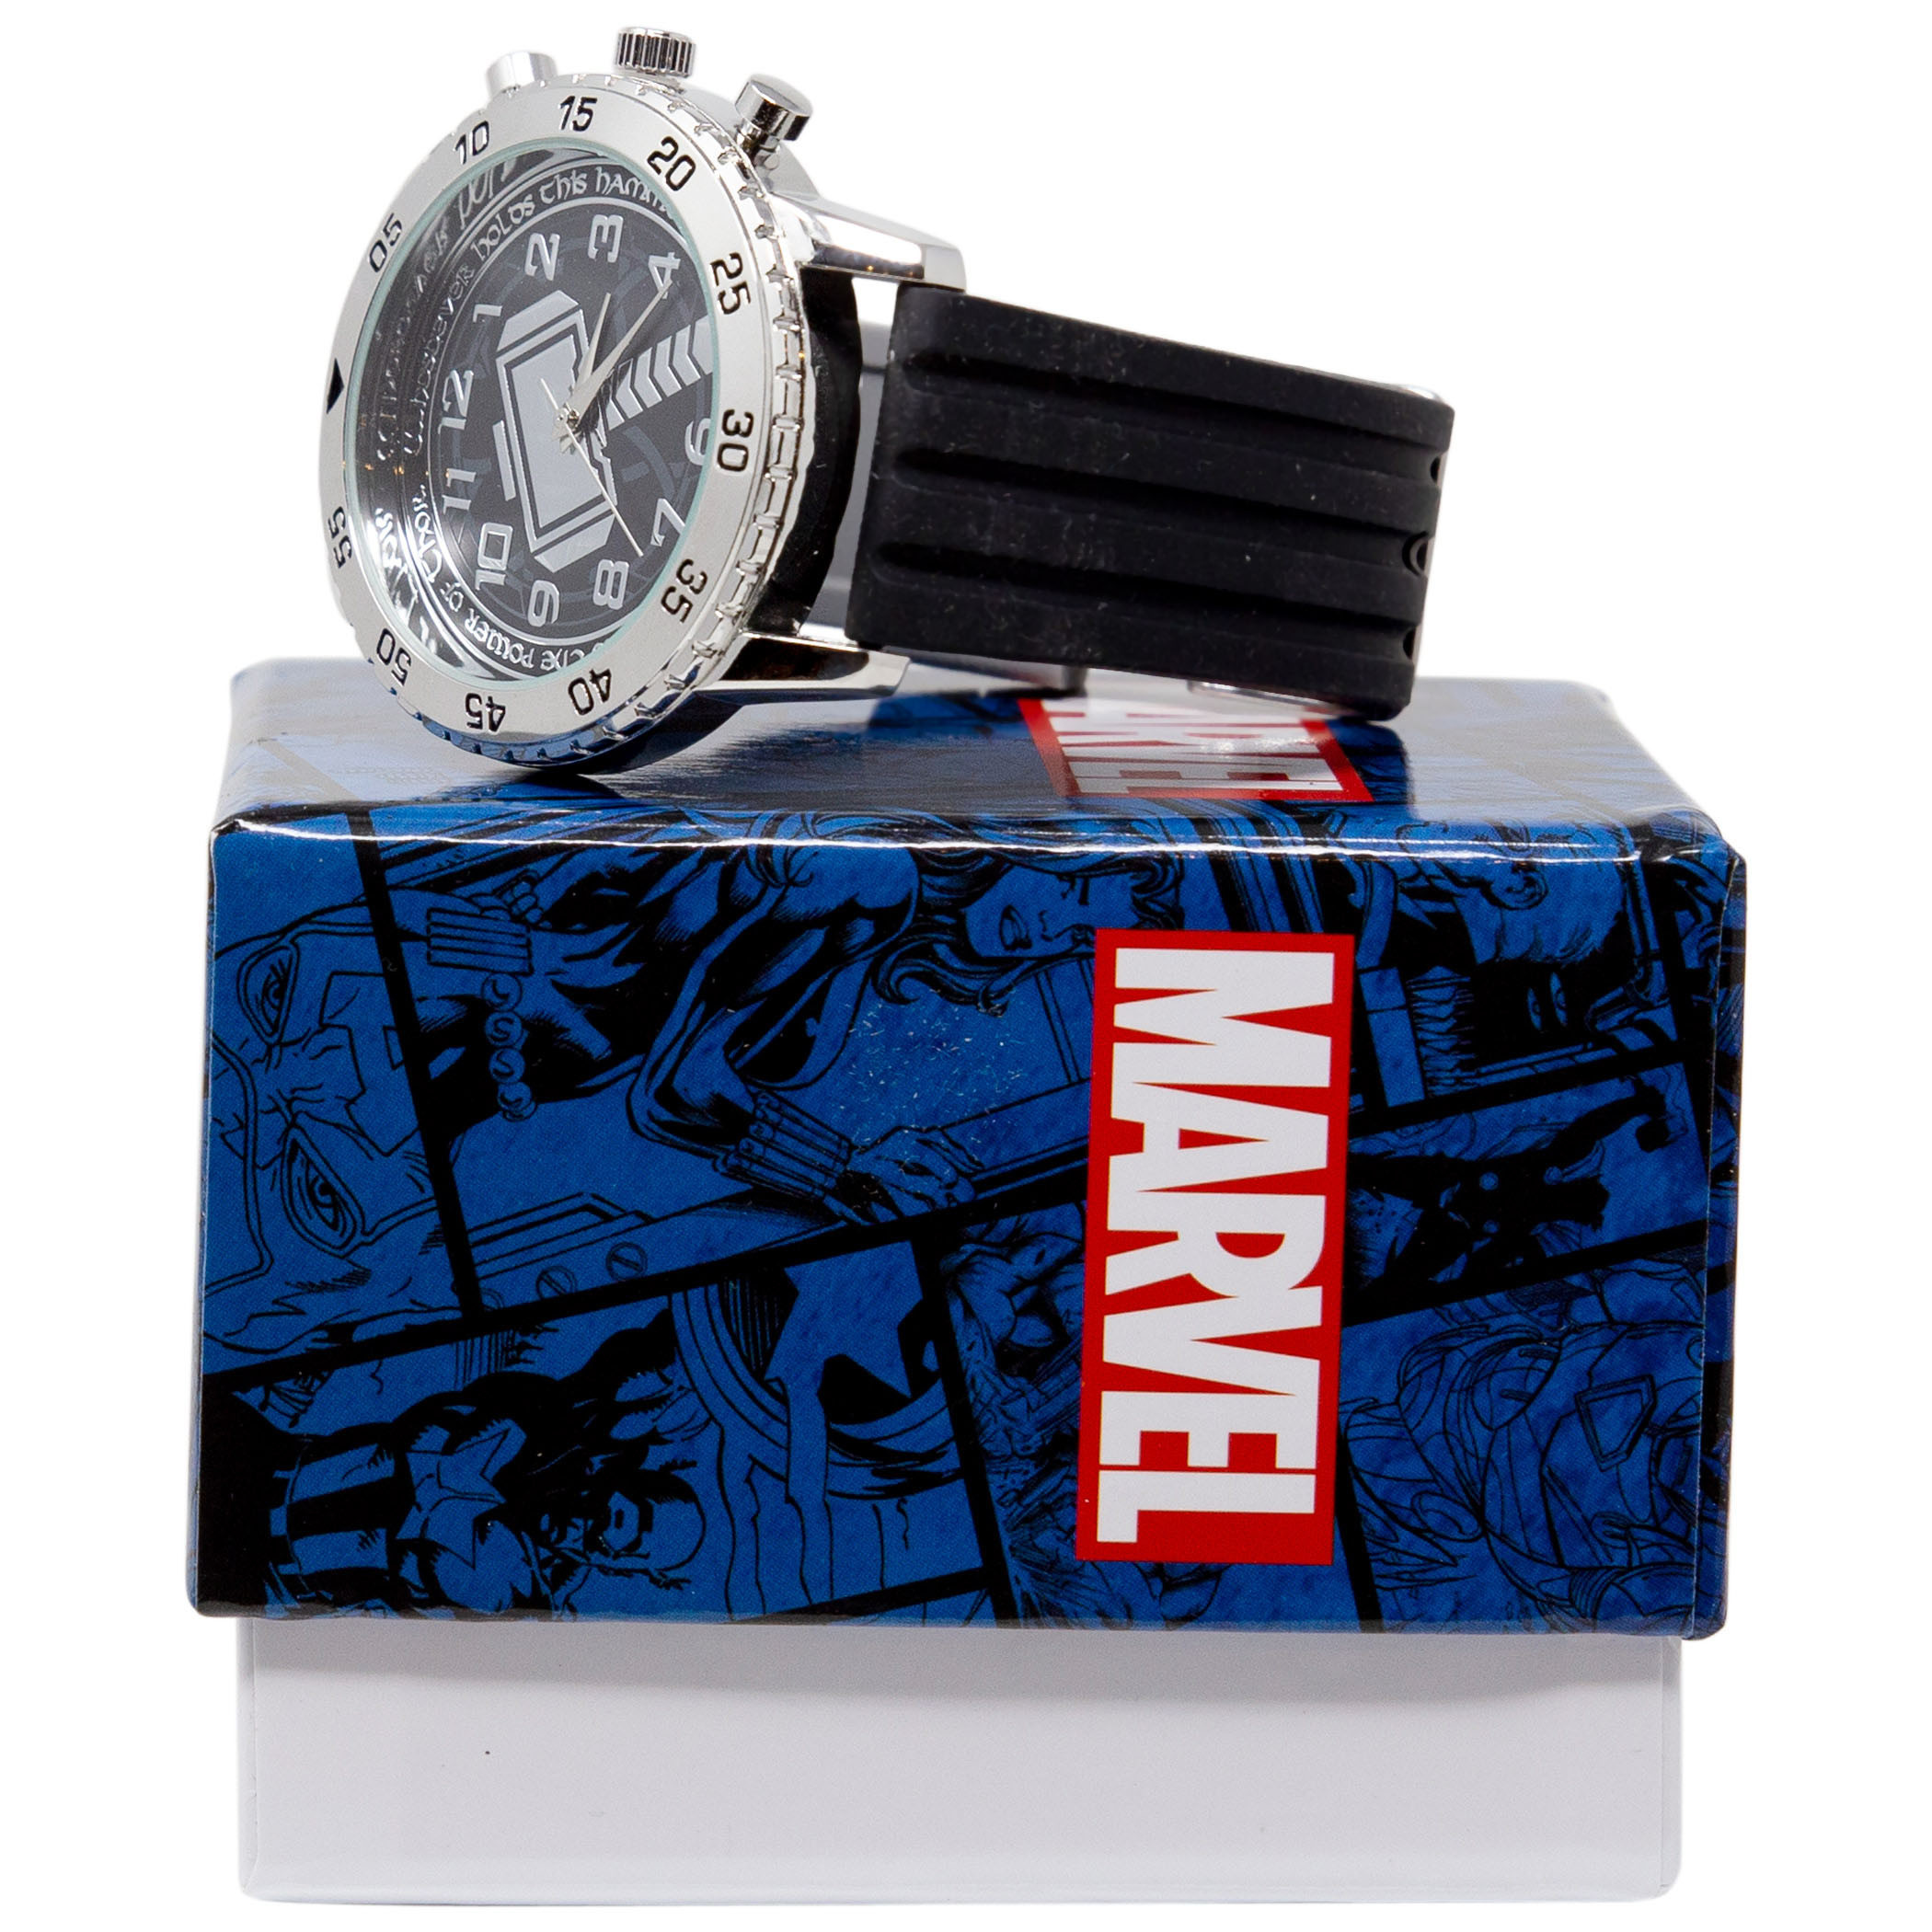 Thor's Mjlonir Classic Watch with Rubber Band